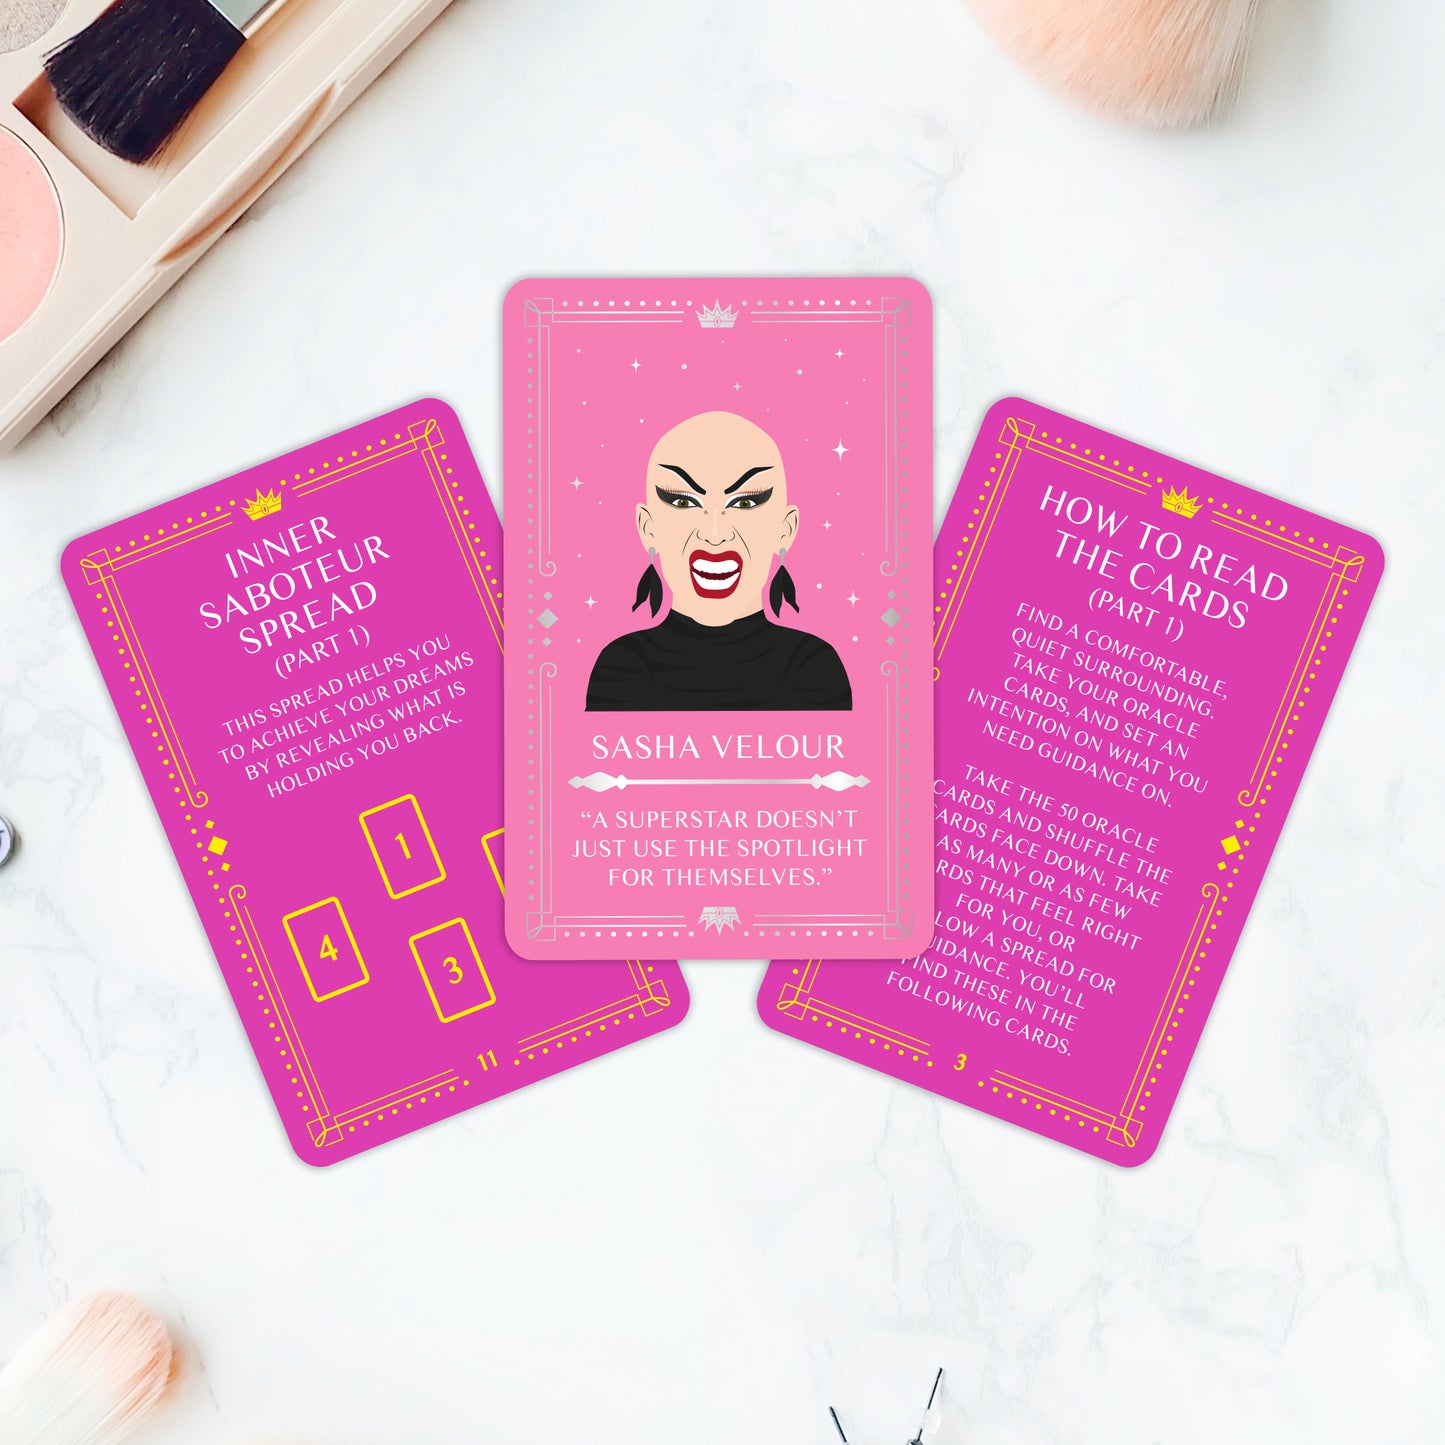 Drag Queen Oracles Cards - Gift Republic